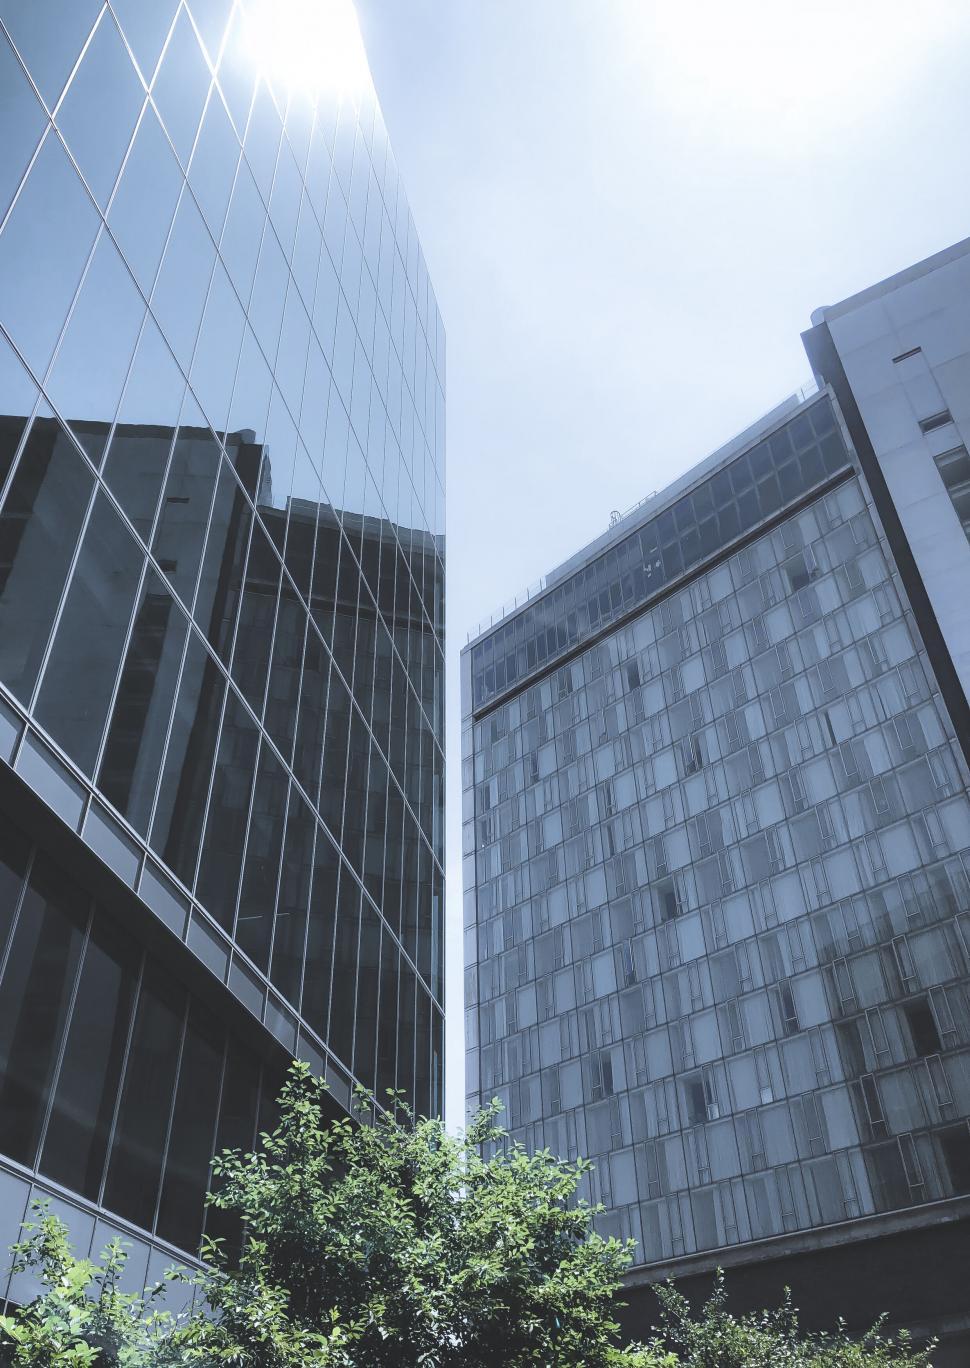 Free Image of Modern buildings with reflective glass surfaces 